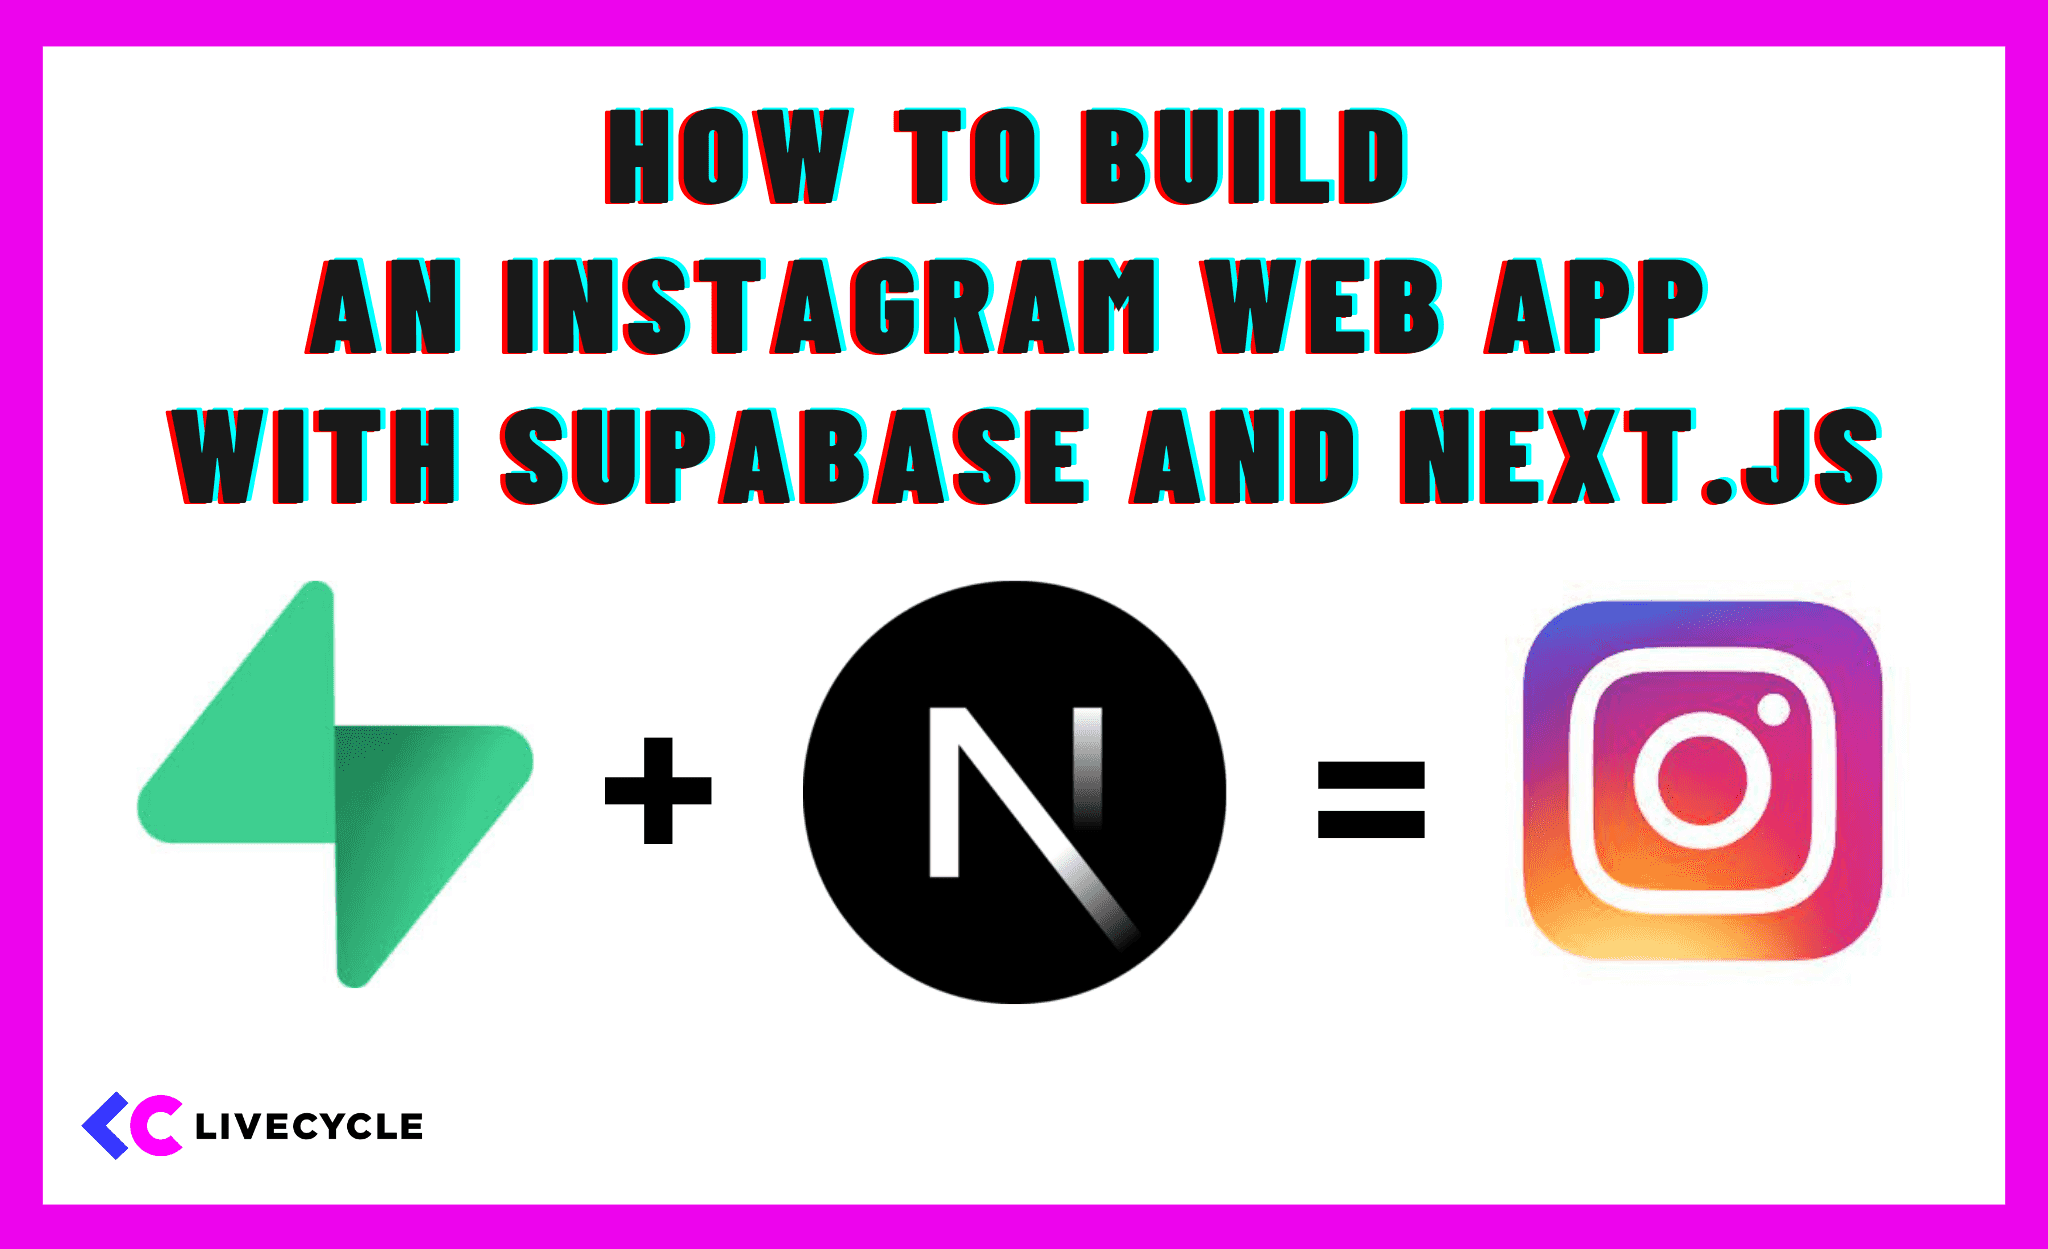 How to Build an Instagram Web App with Supabase and Next.js